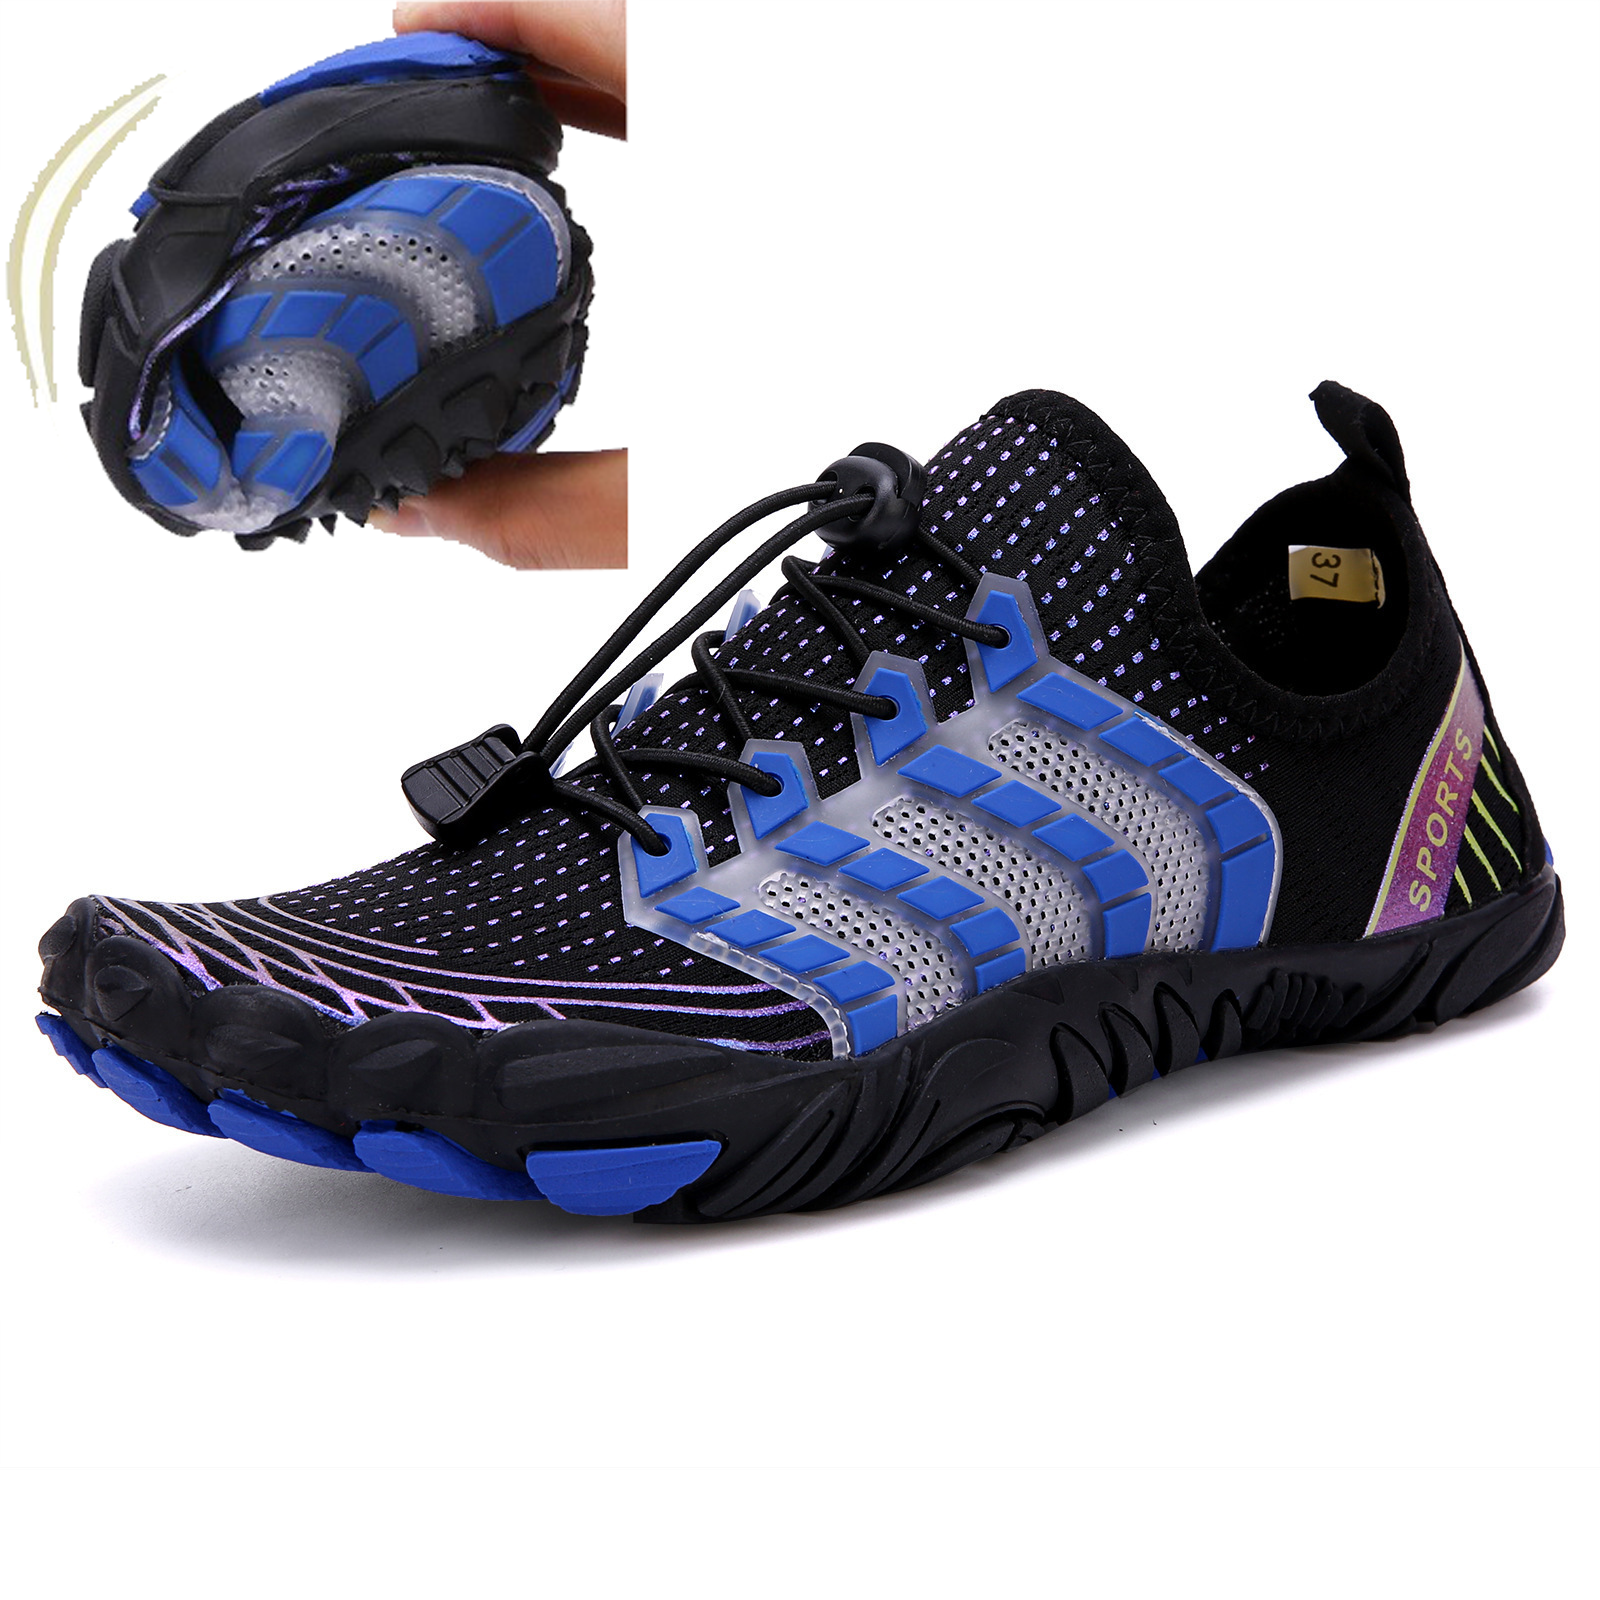 Men's Lace-up Anti-slip Outdoor Chic Hiking Wading Shoes